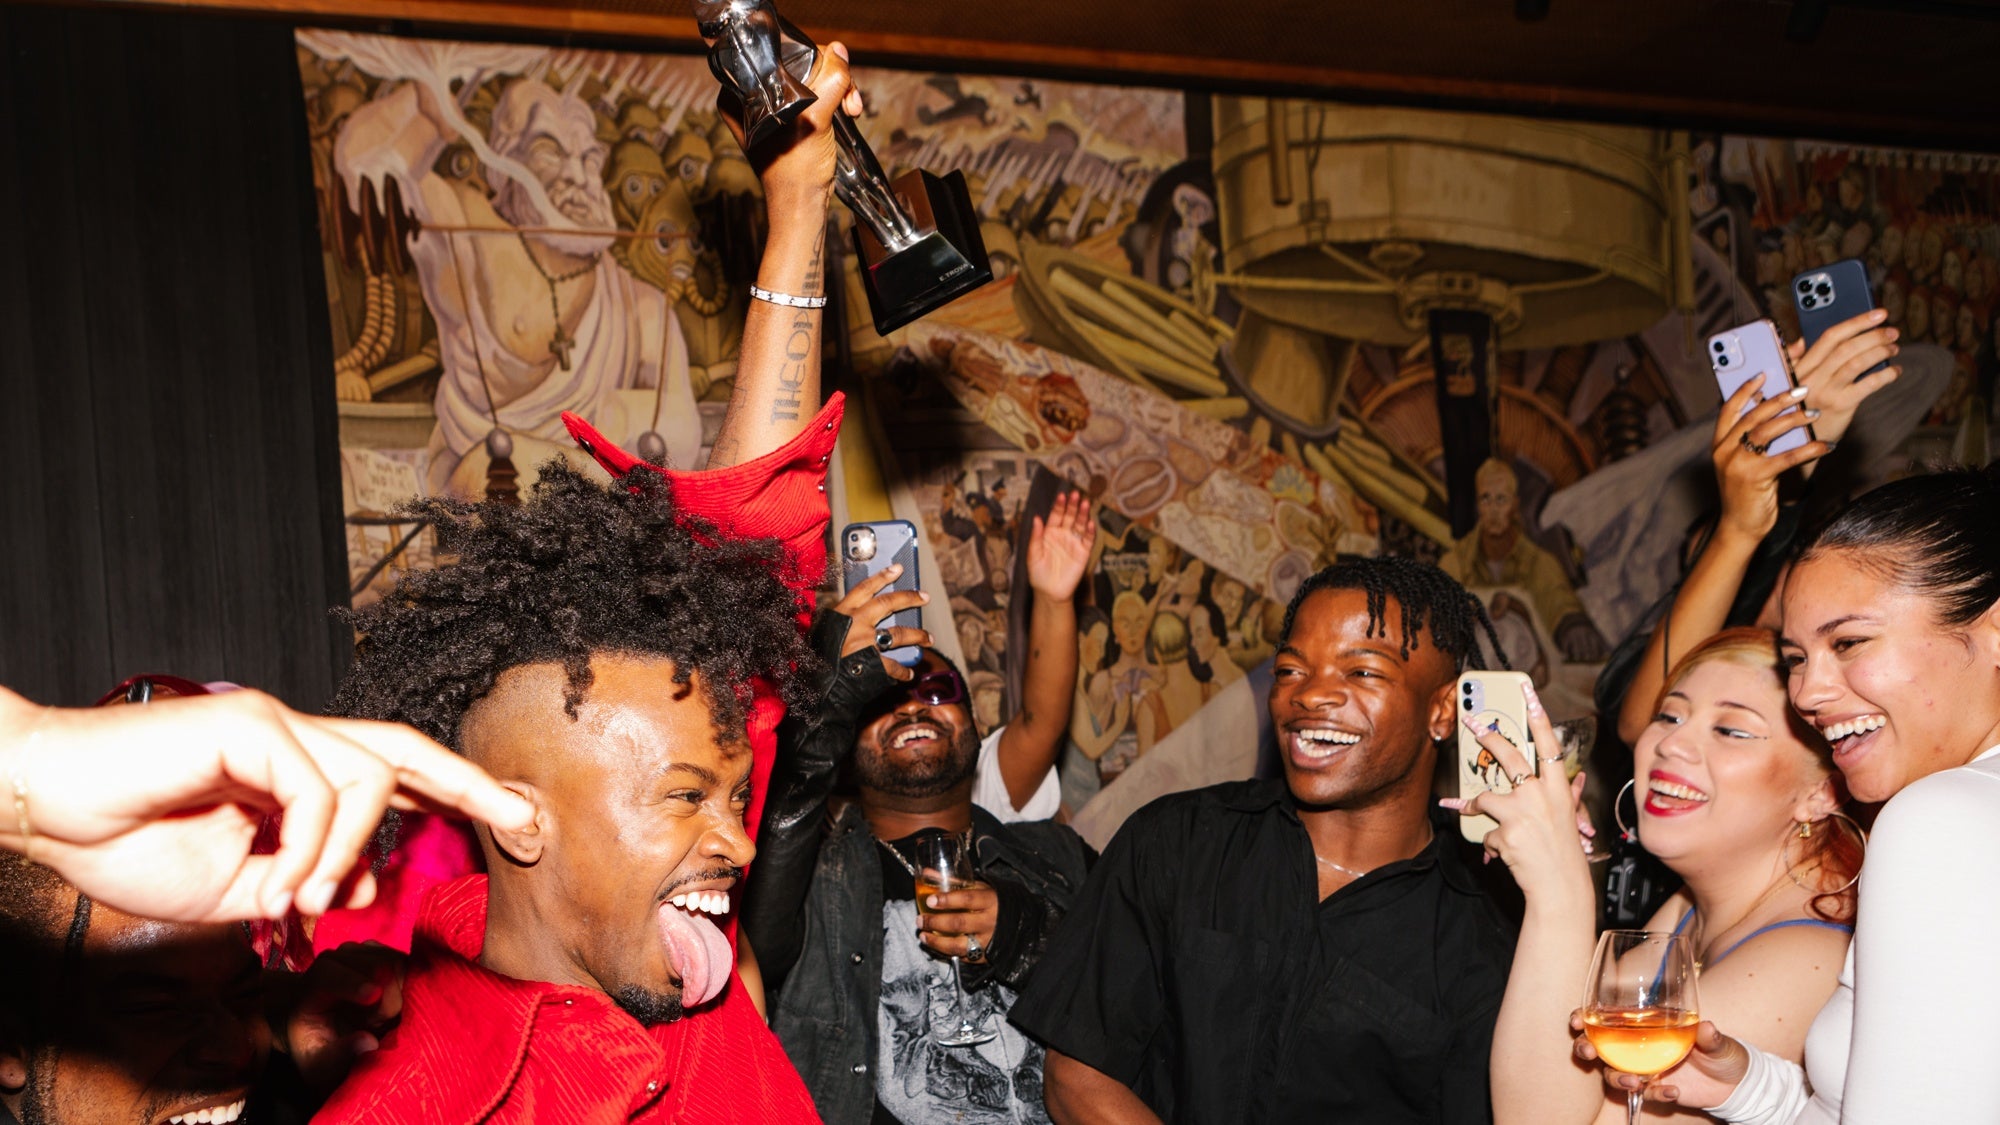 The Black Fashion Vanguard Gathered To Celebrate Theophilio’s CFDA Win In Serious Style